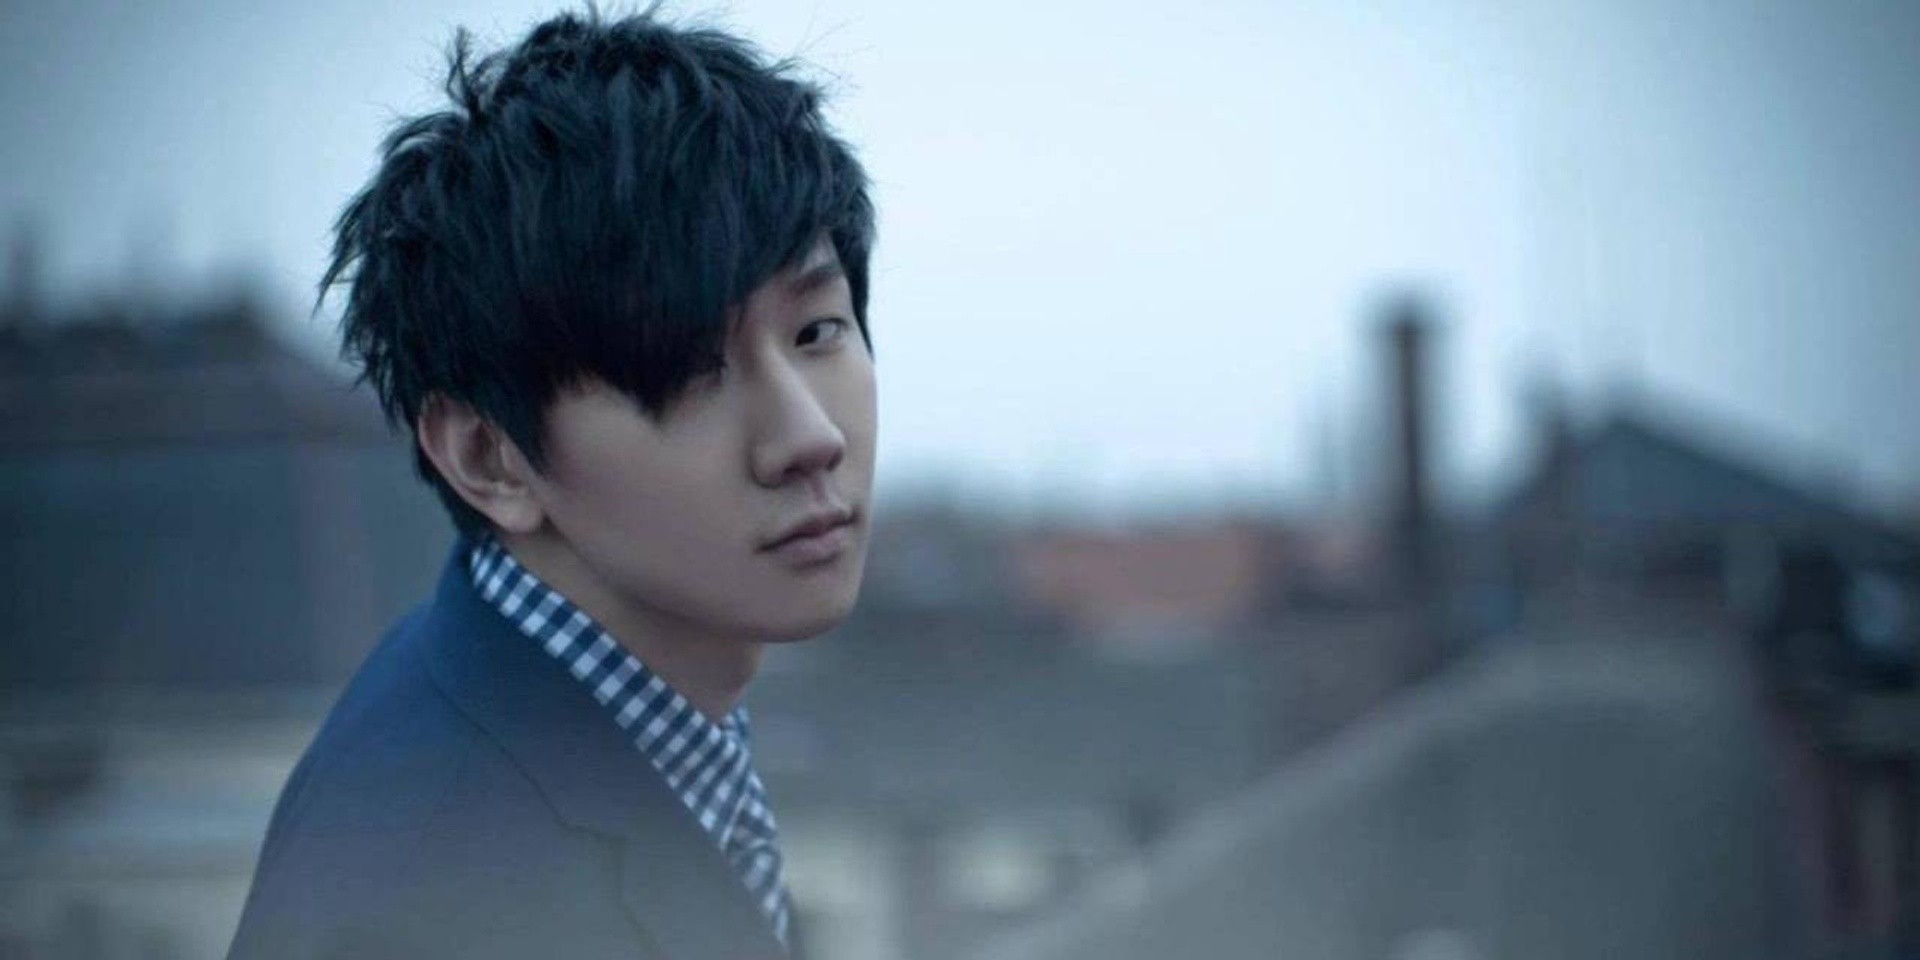 Ticketing and venue details for JJ Lin's Singapore shows released